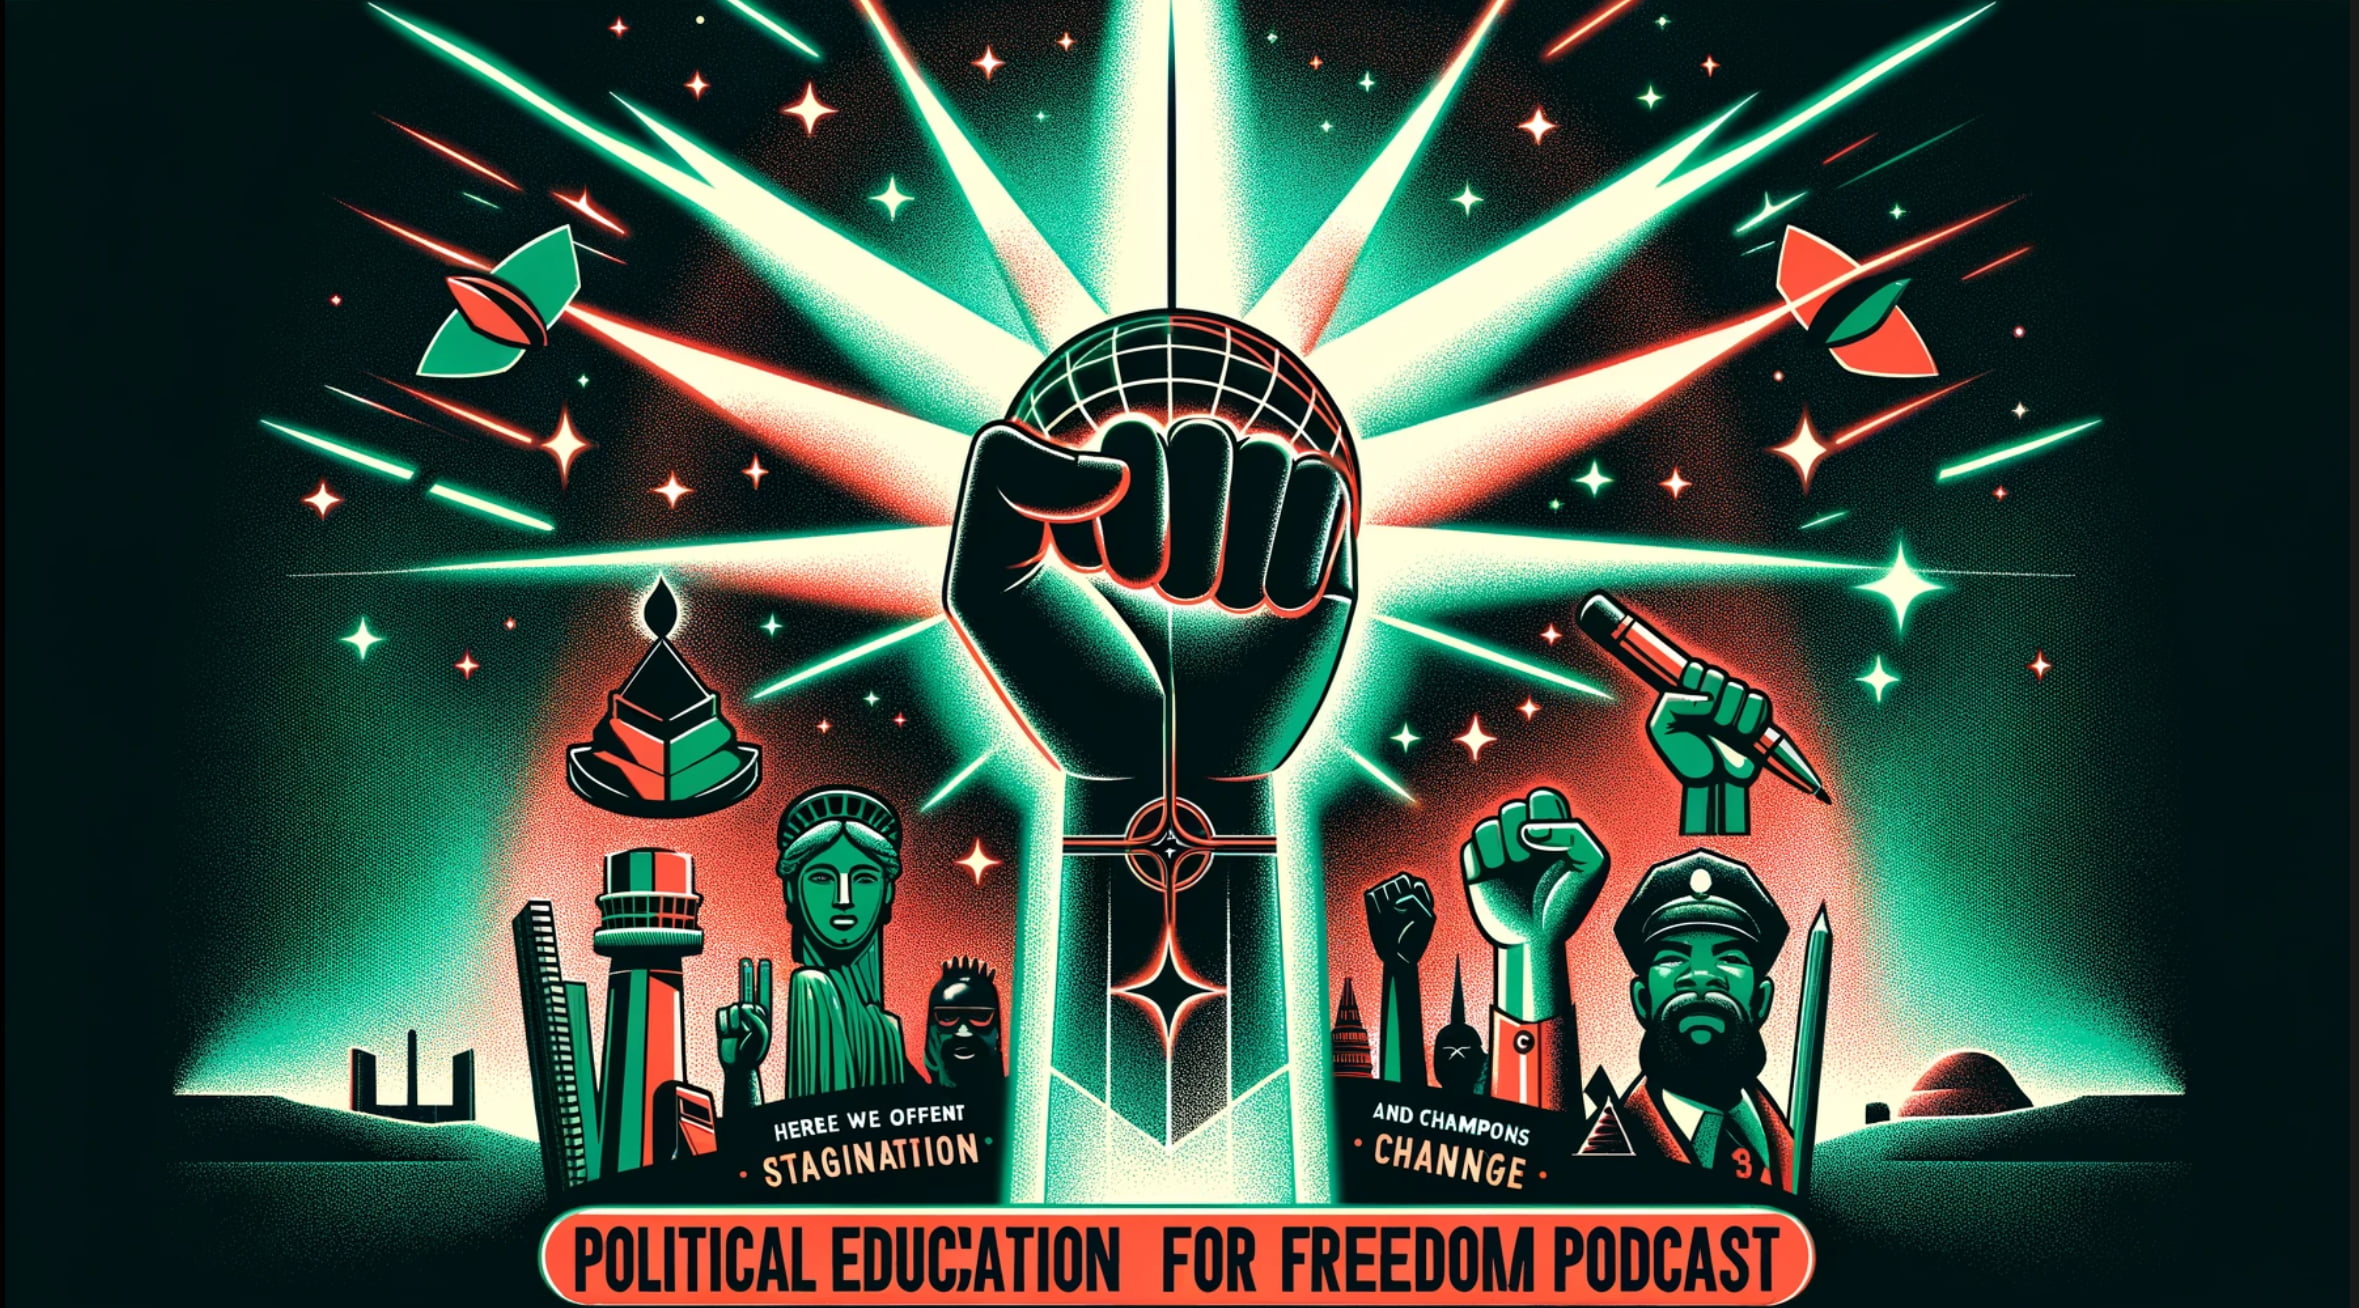 Black Education podcast graphic